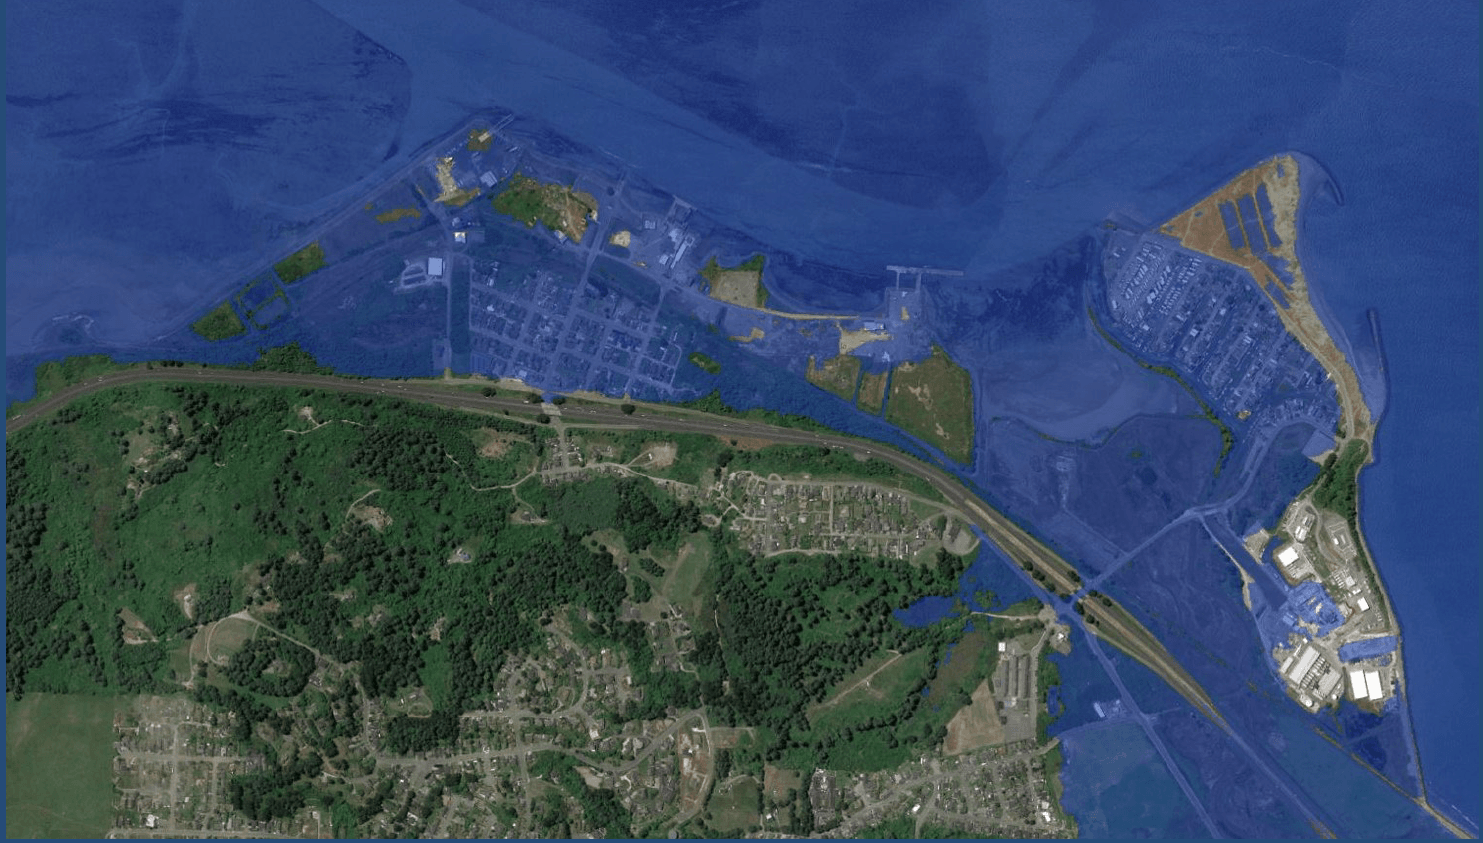 Sea Level Rise Threatens Humboldt Bay's Nuclear Legacy